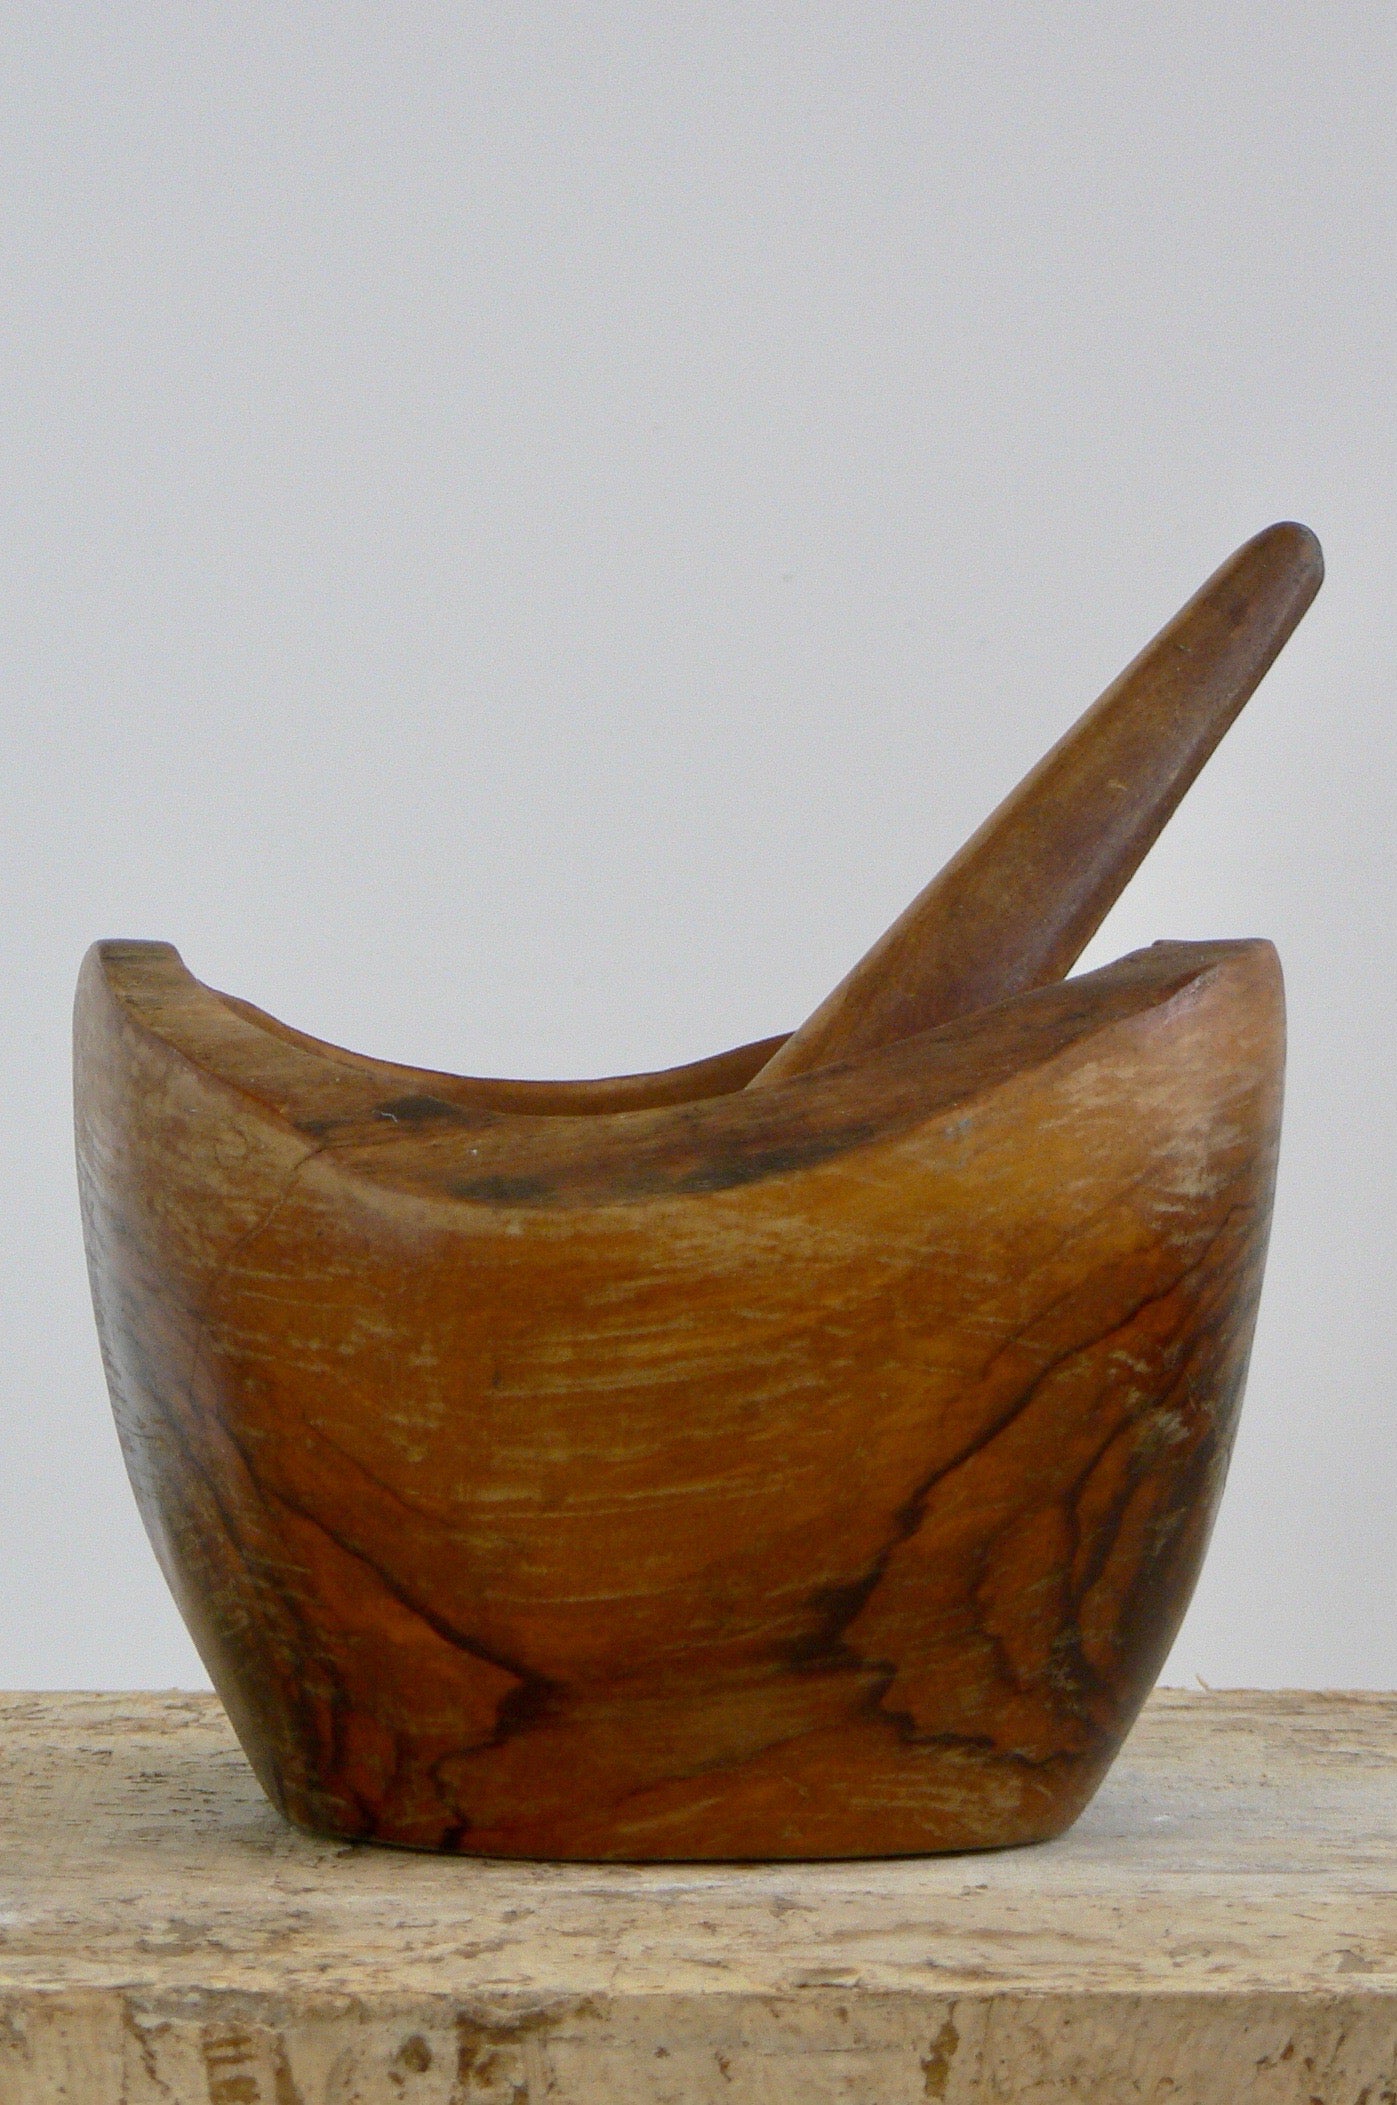 1950s French Olive Wood Mortar and Pestle – Exquisite Brutalist Design

Bowl size:
19cm x 18 cm
Height 14 cm.